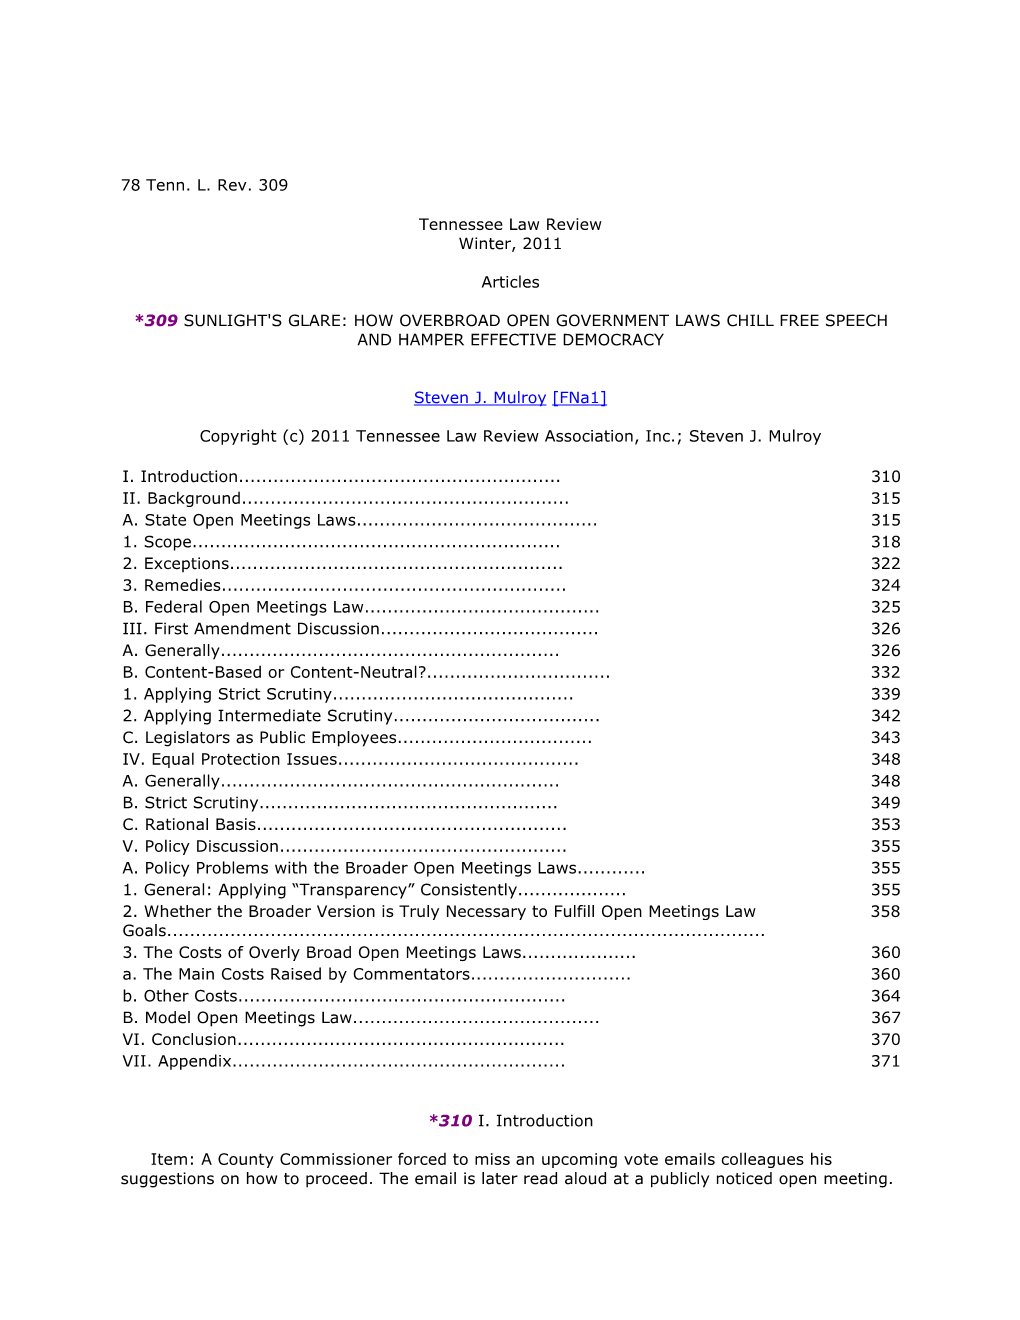 78 Tenn. L. Rev. 309 Tennessee Law Review Winter, 2011 Articles *309